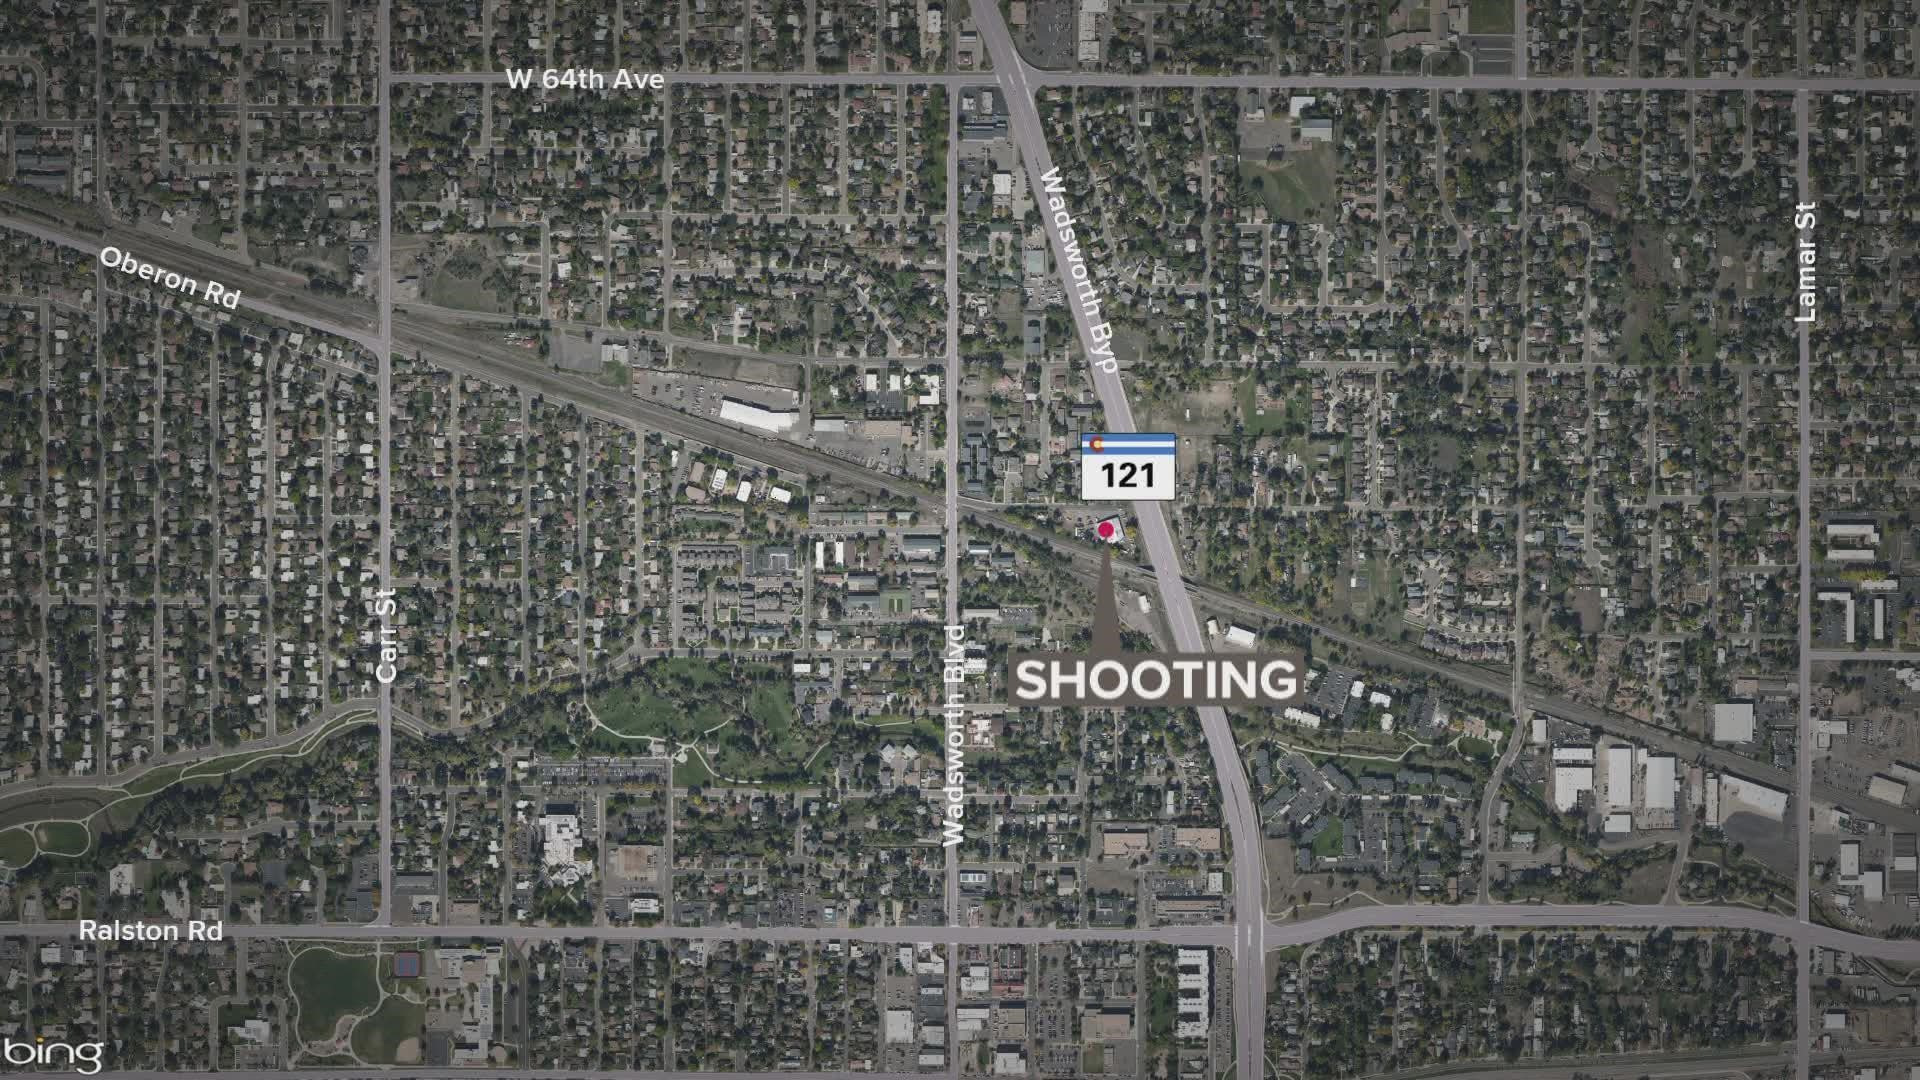 Multiple officers shot at the suspect when he drove toward them in a stolen vehicle, Arvada Police said.